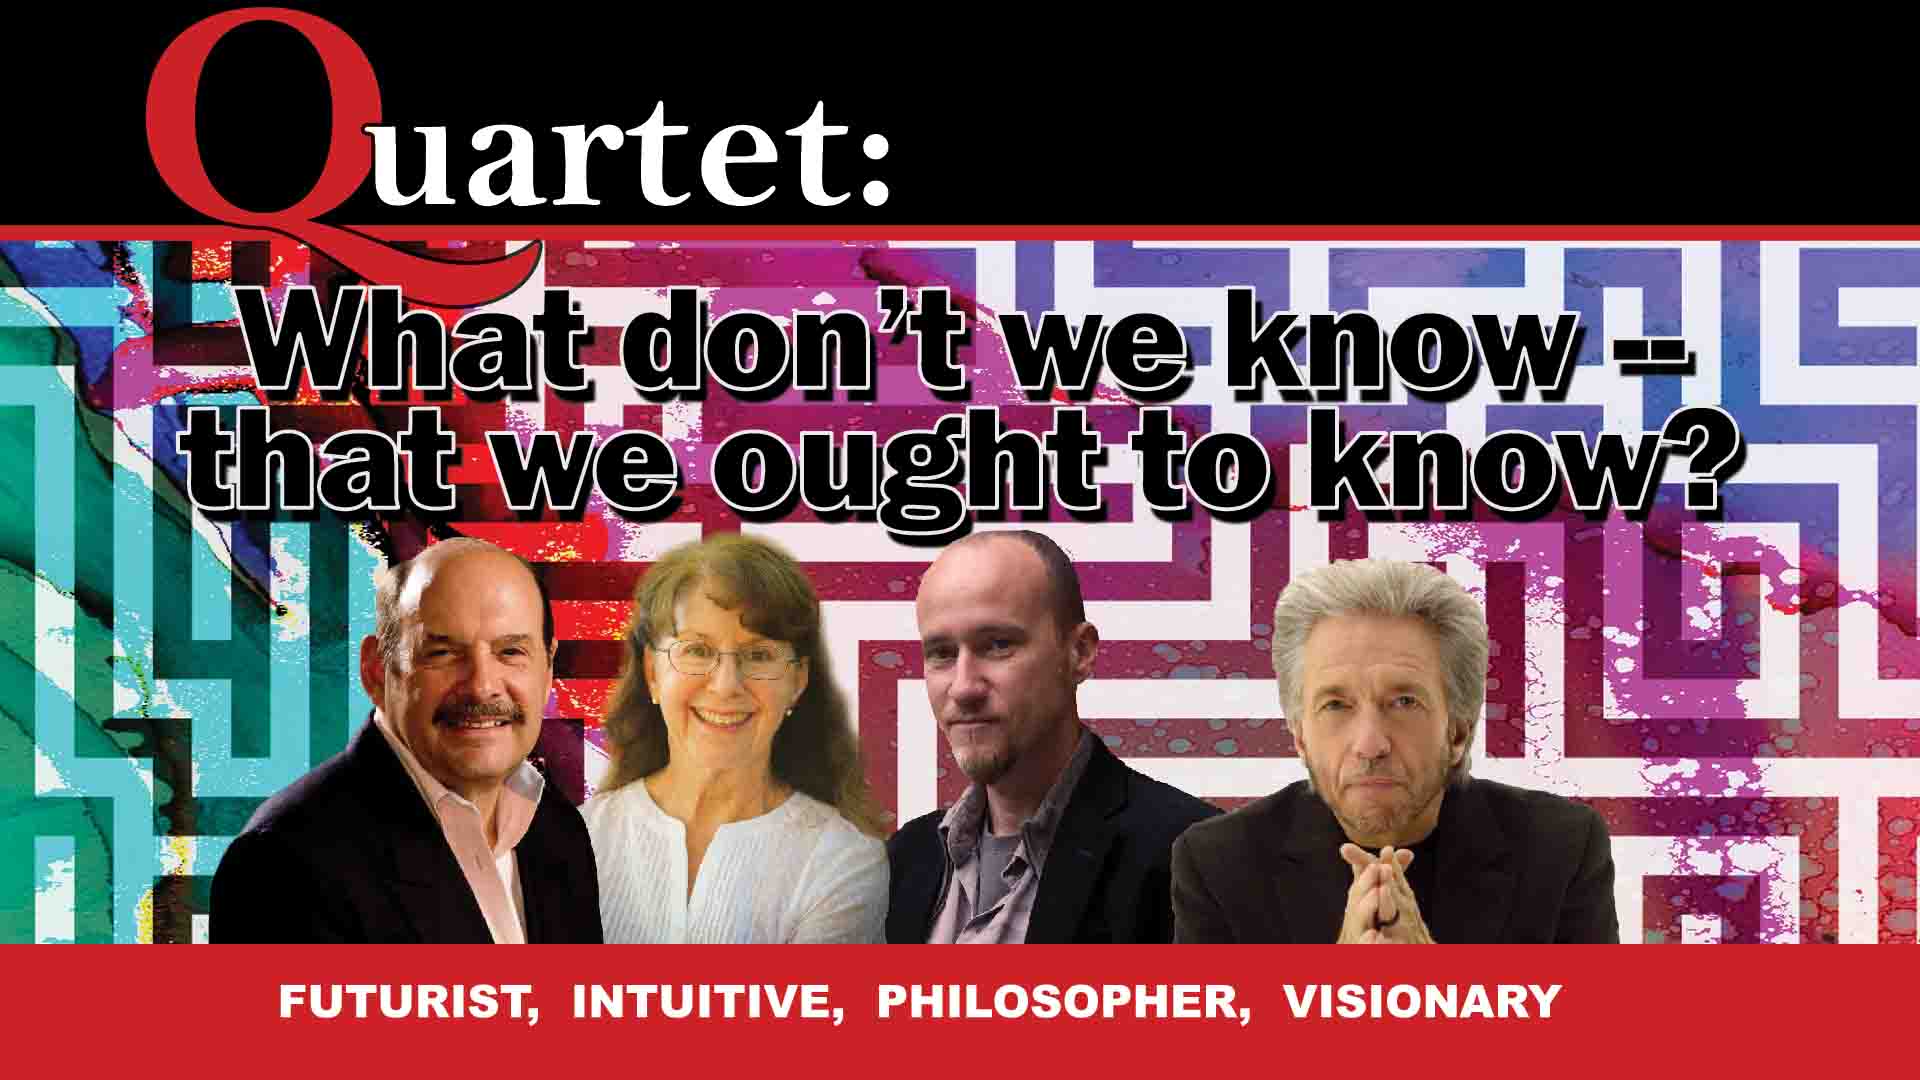 Quartet, What don't we know that we ought to know?